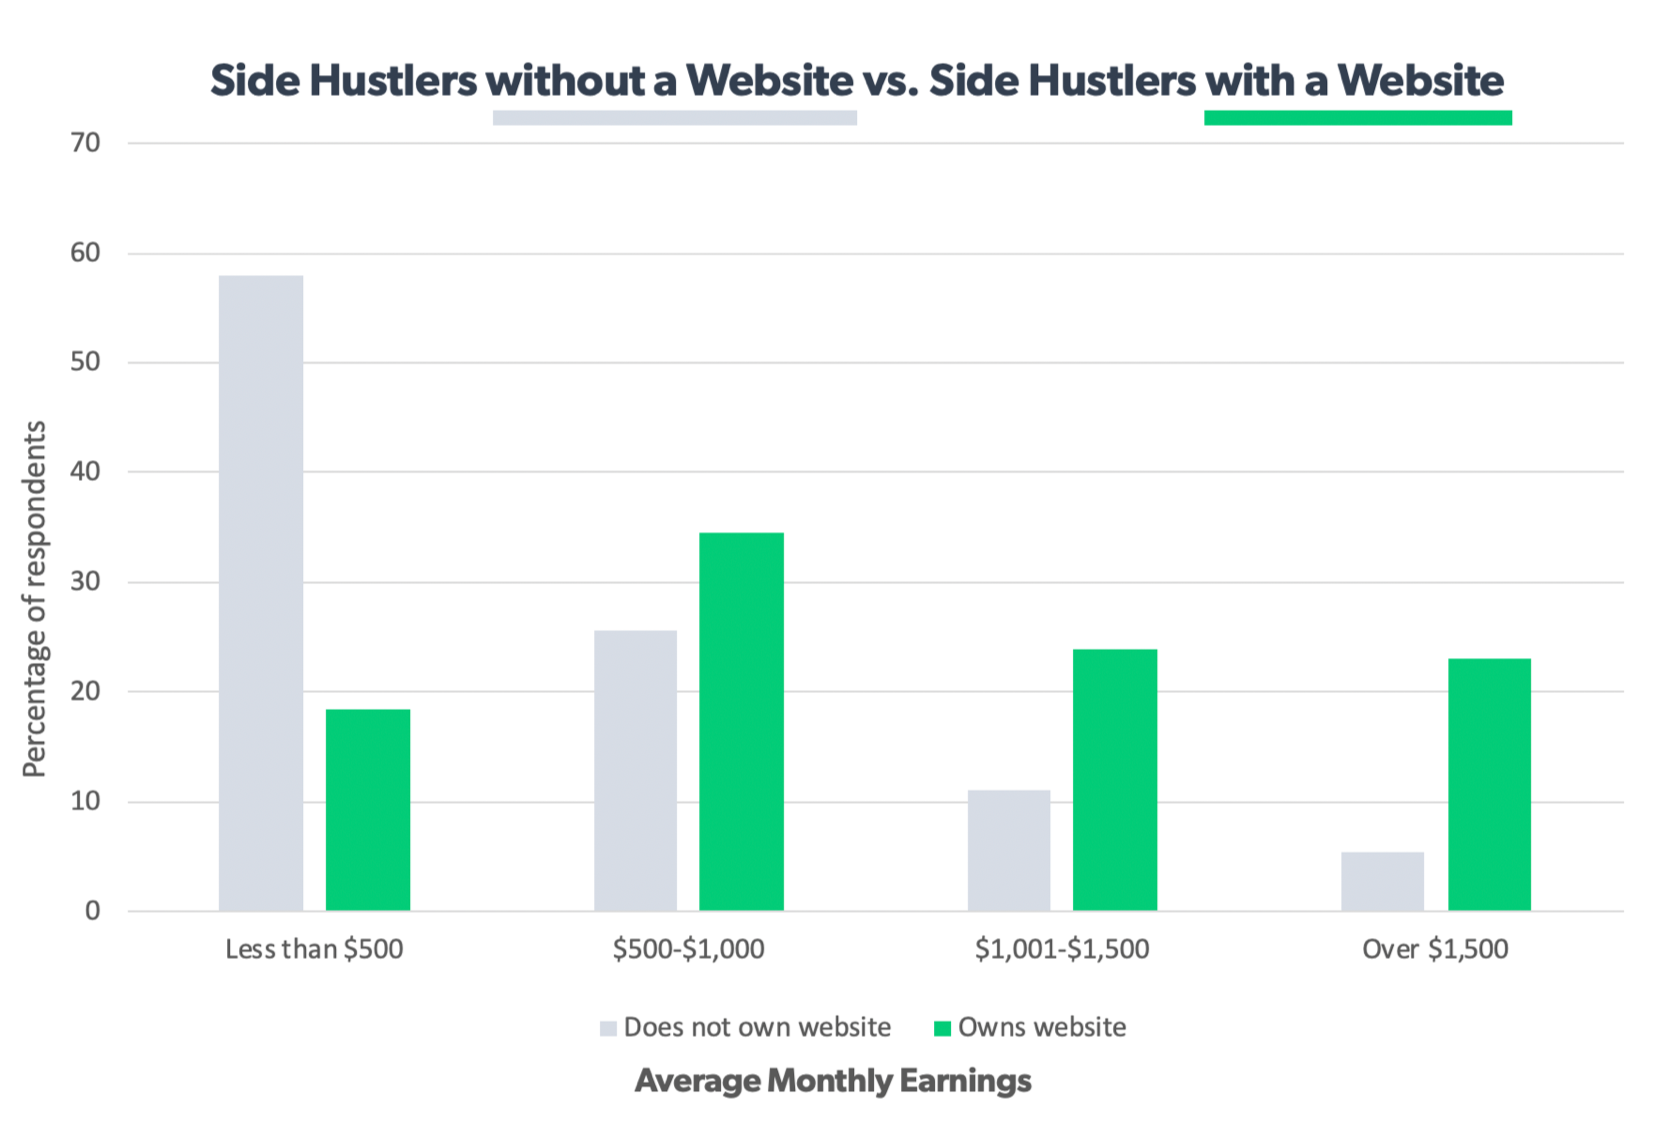 Chart showing that side hustlers with a website far out earn those that do not have a website to promote their services.